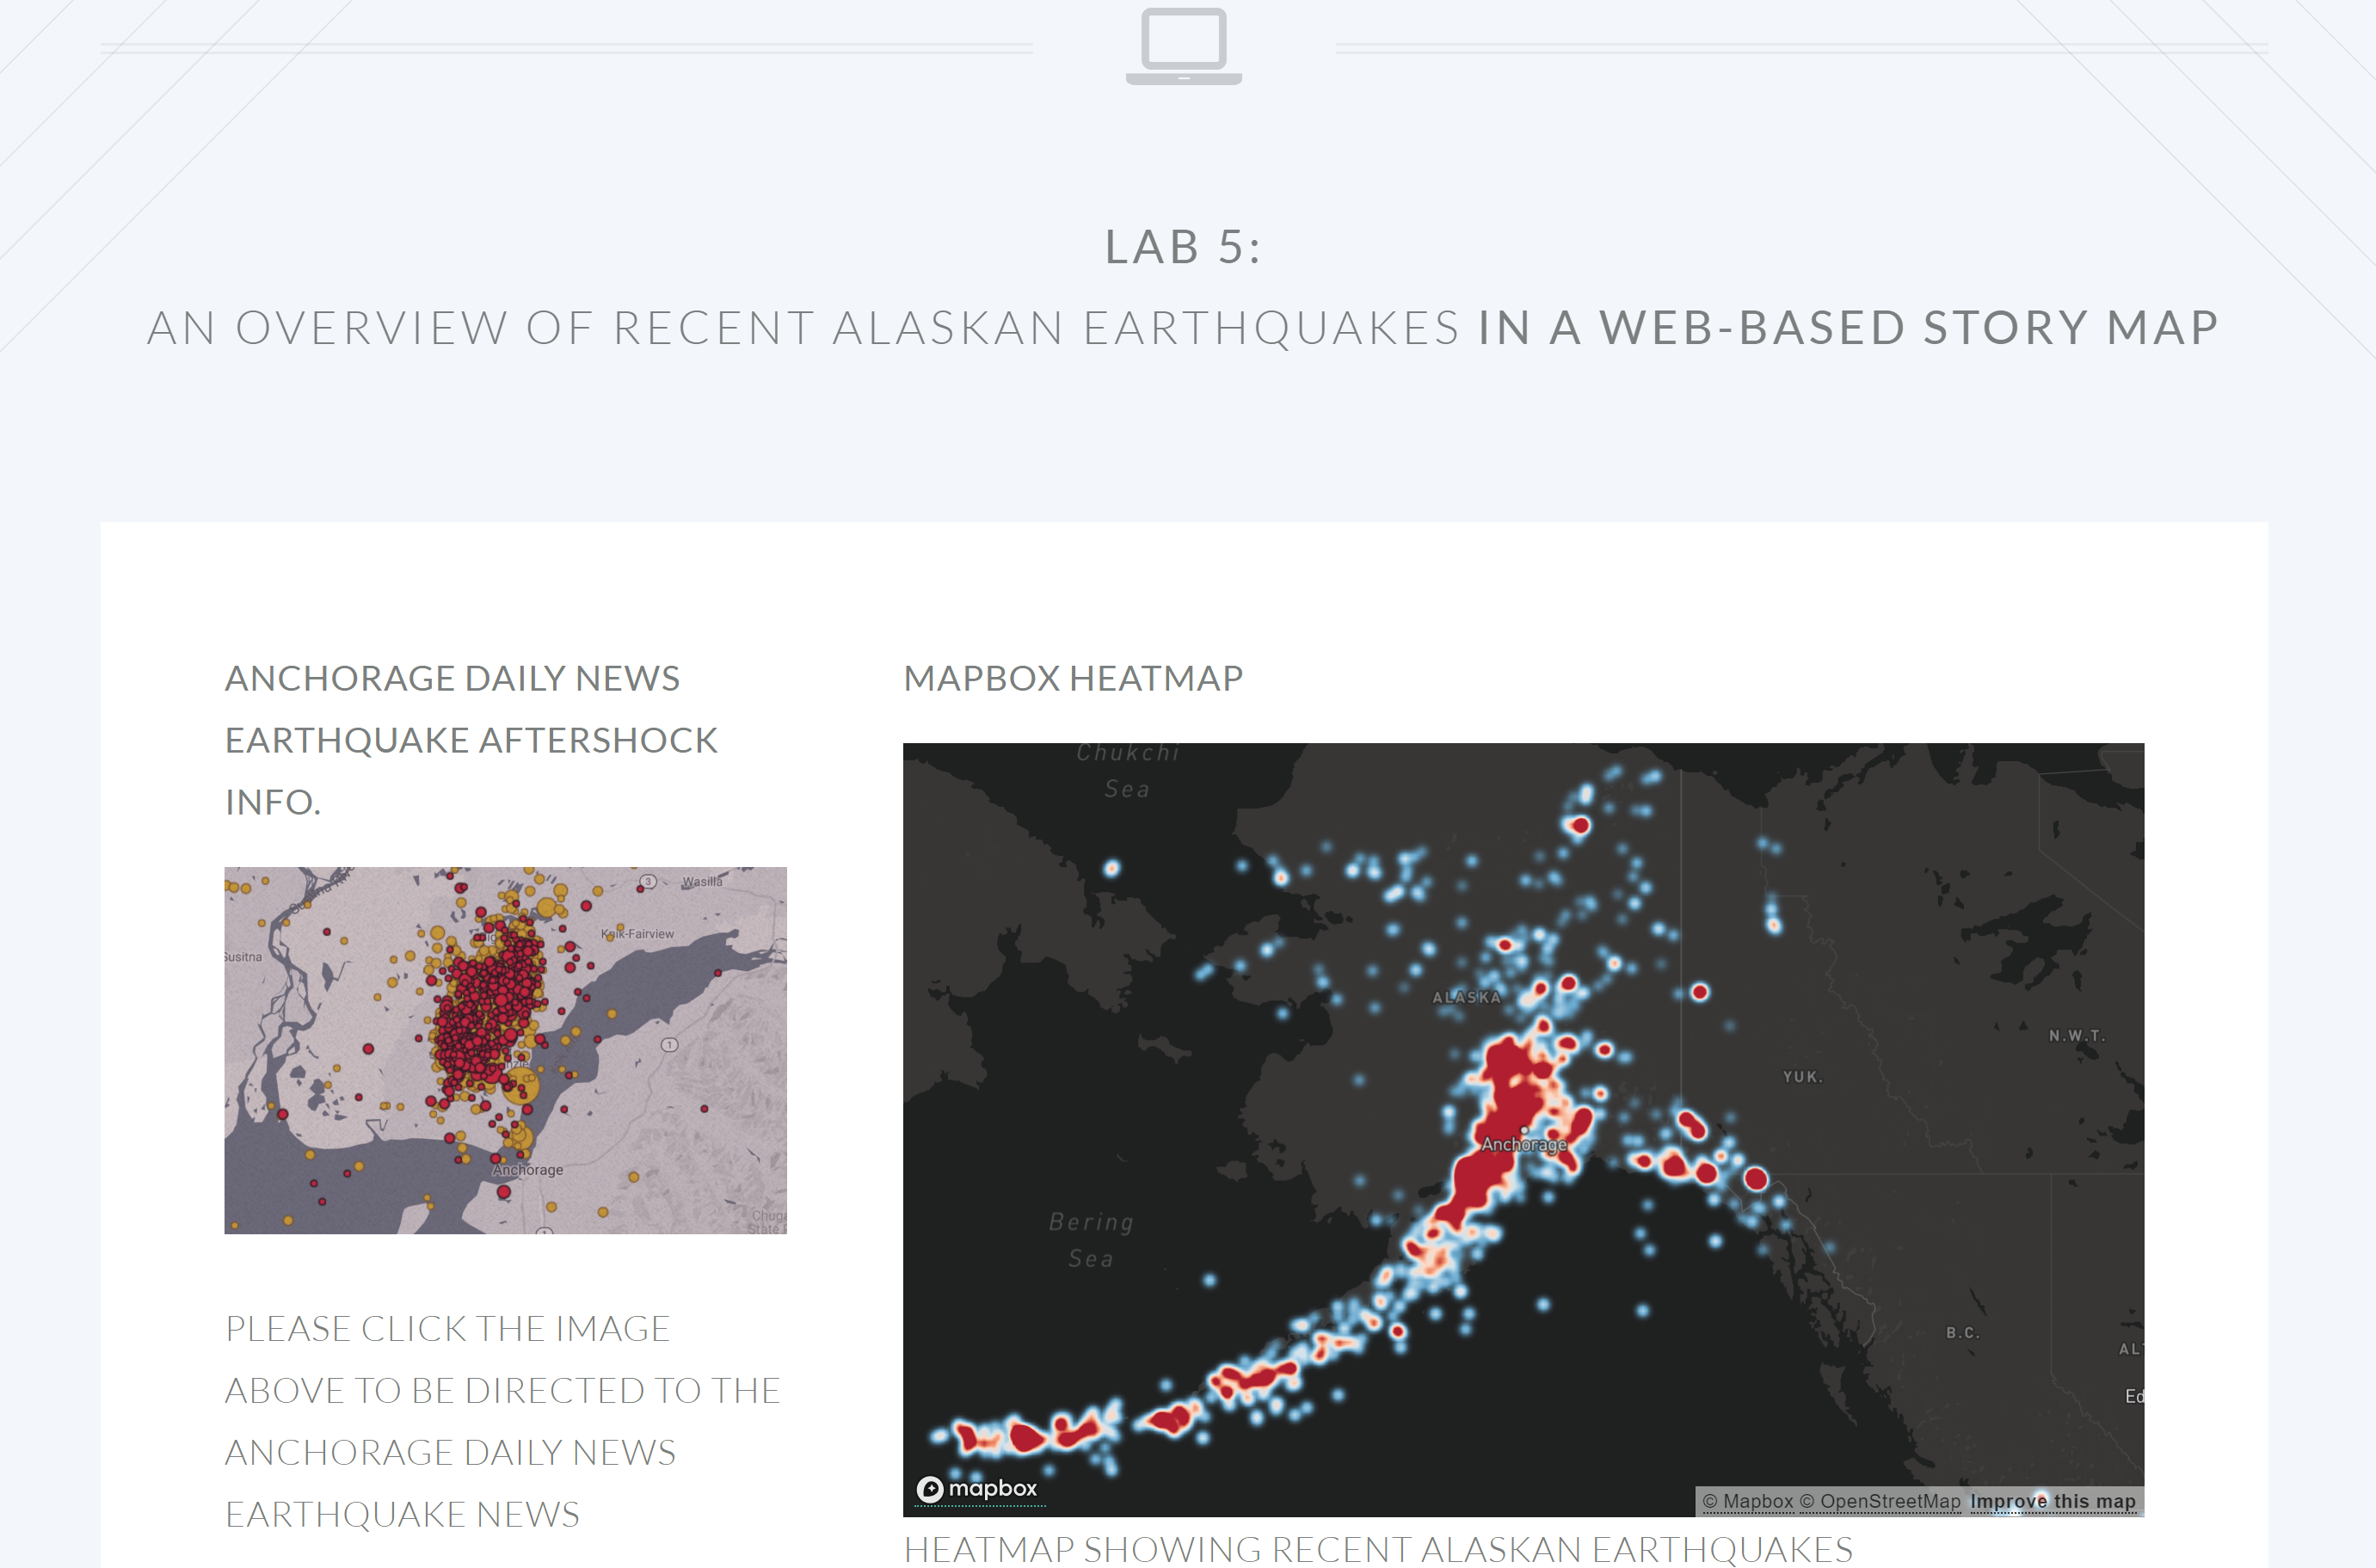 Lab 5: A Web-Based Story Map